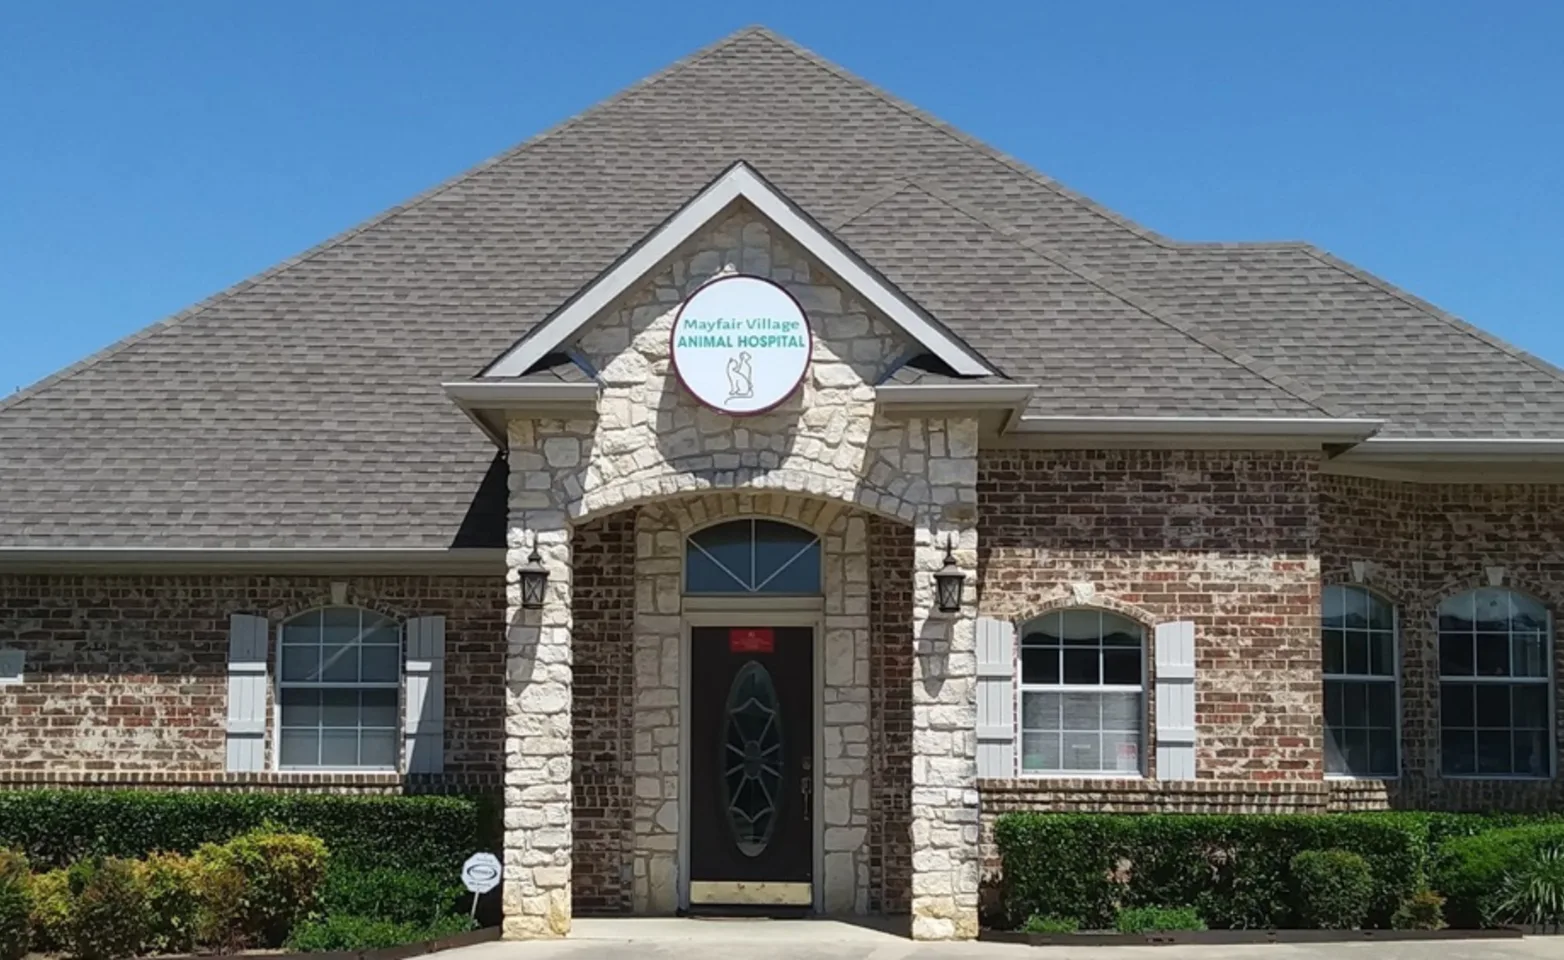 Front Exterior of Mayfair Village Animal Hospital